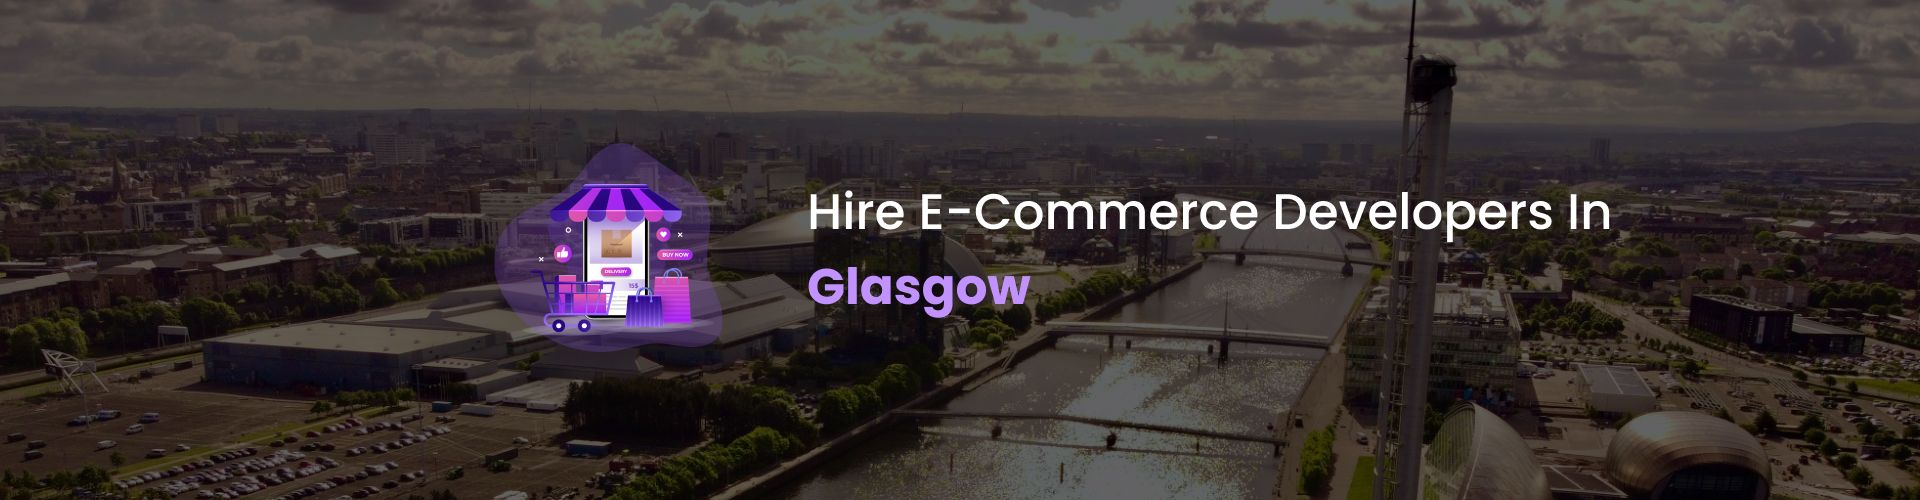 hire ecommerce developers in glasgow